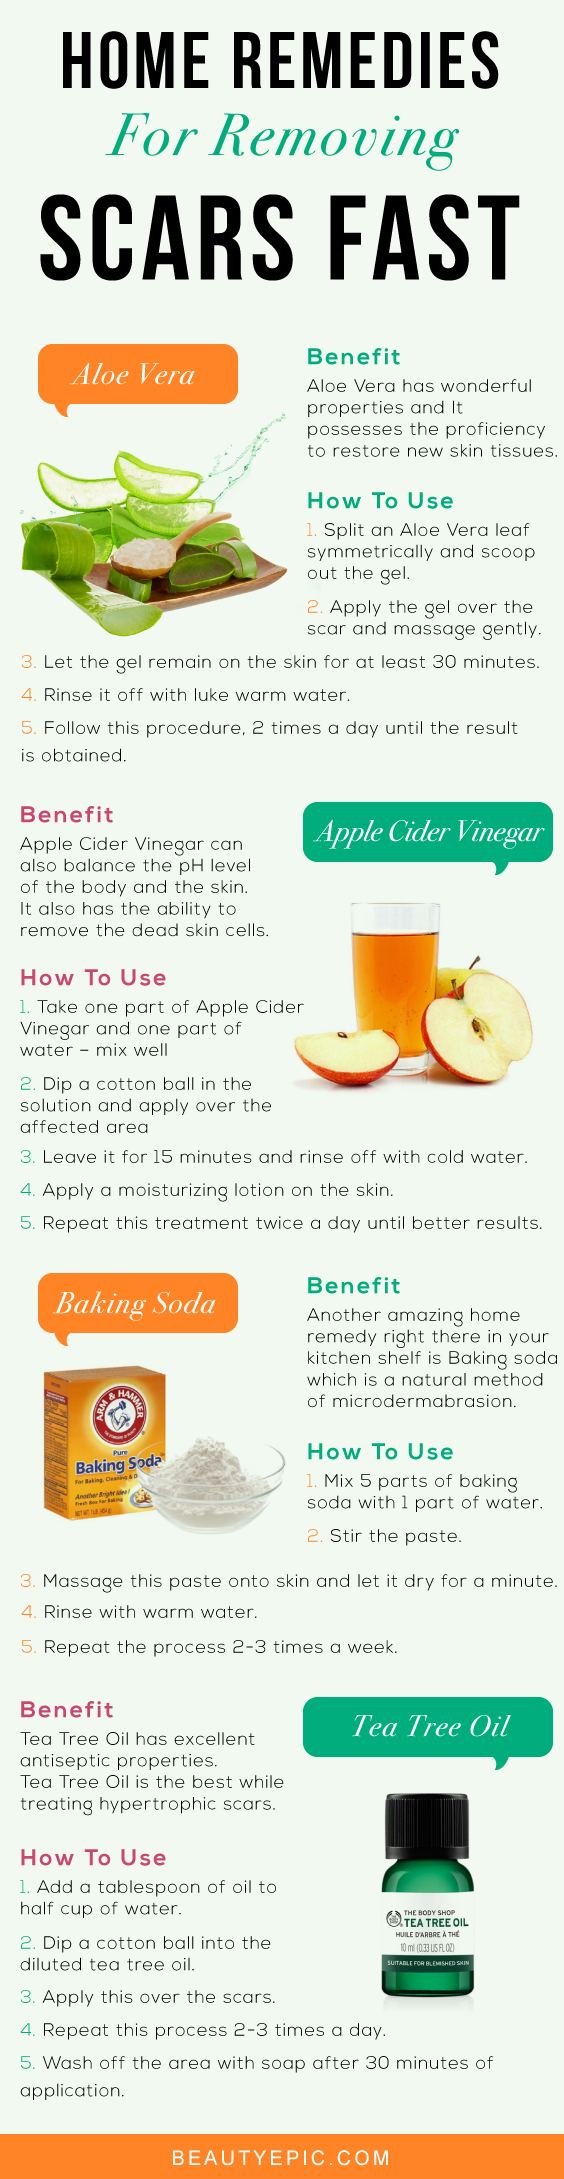 Top Natural Remedies For Fast Scar Removal Infographic